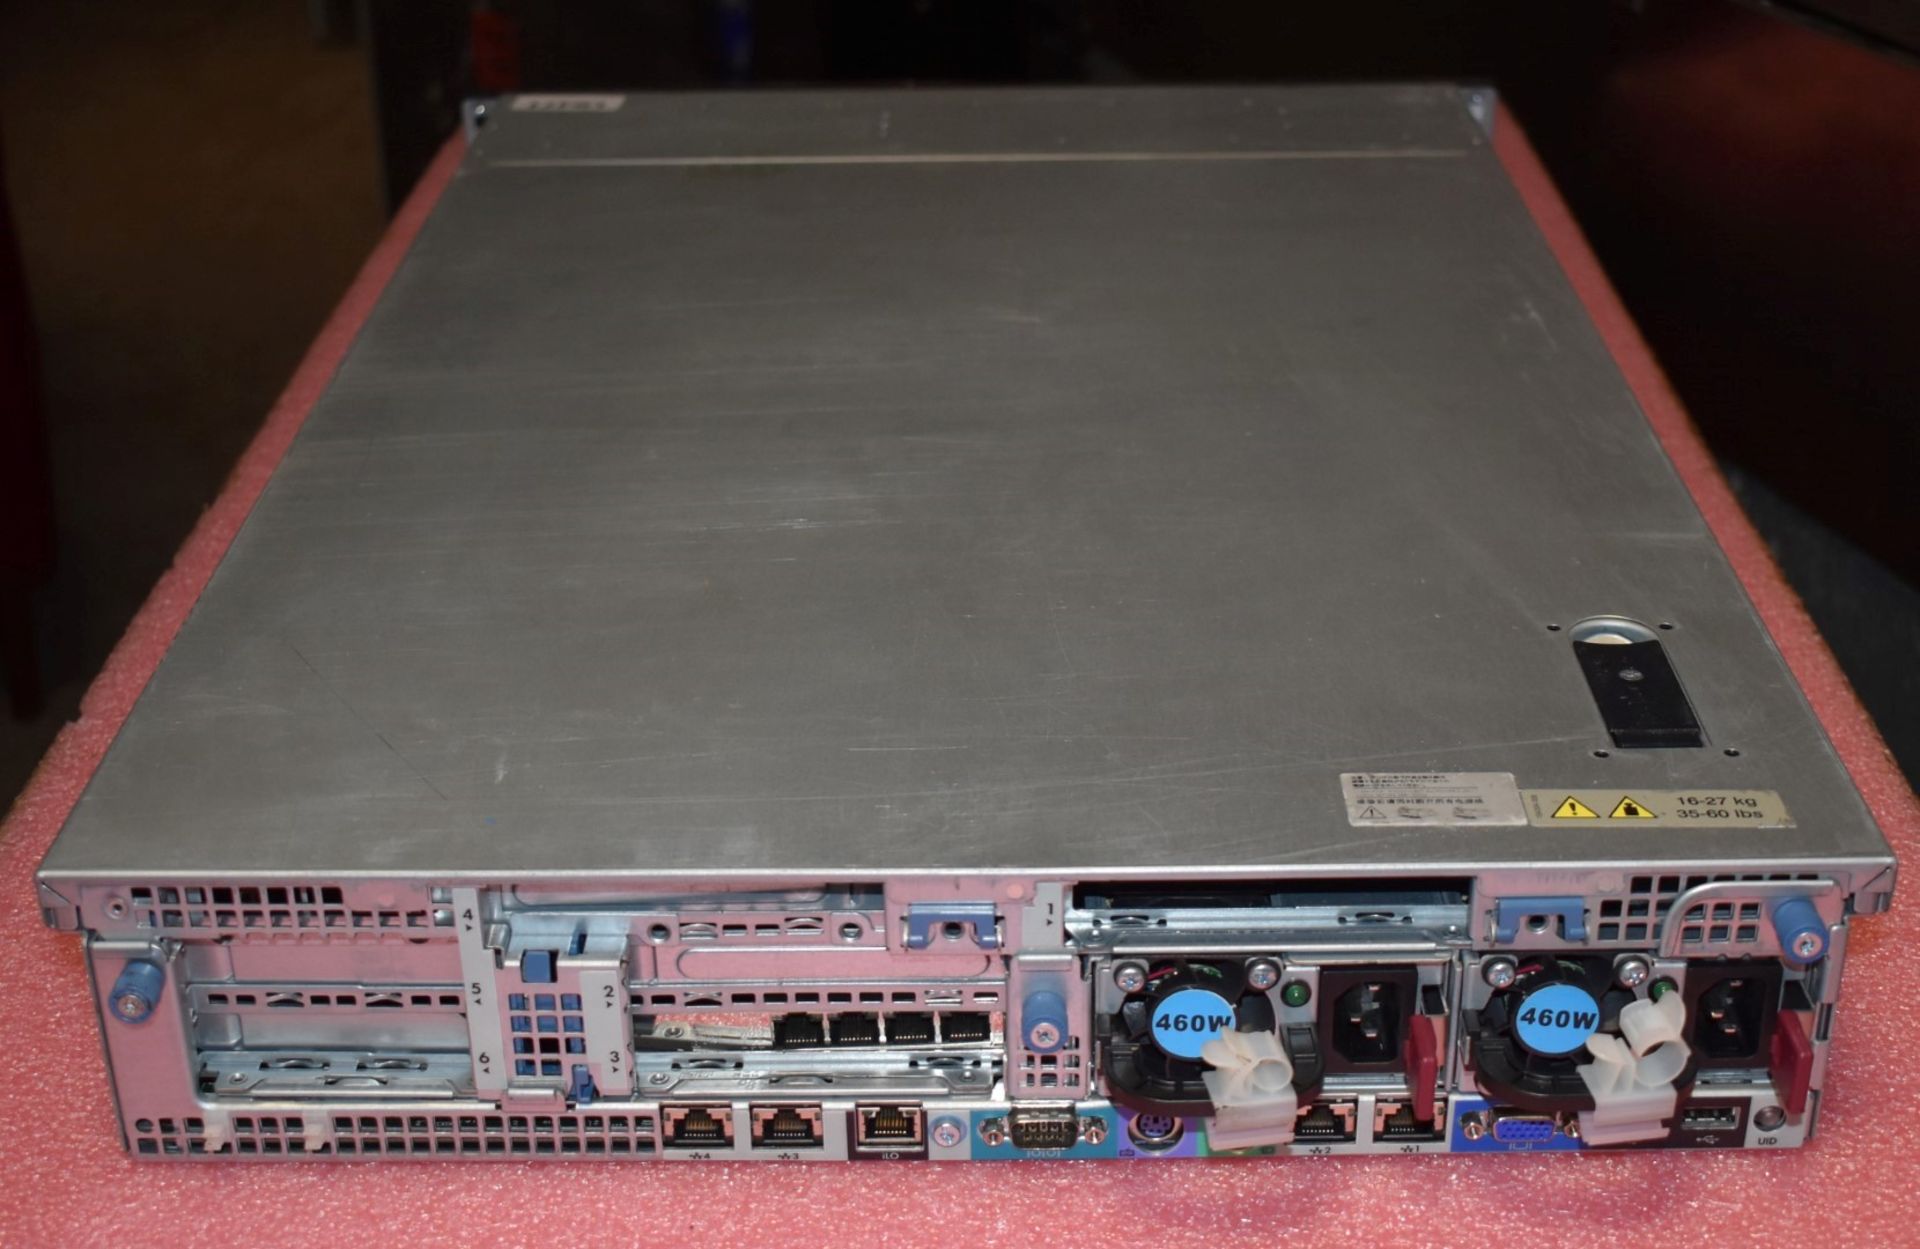 1 x HP ProLiant DL380 G7 Server With 2 x Intel Xeon X5650 Six Core 3.06ghz Processors and 92gb Ram - - Image 7 of 8